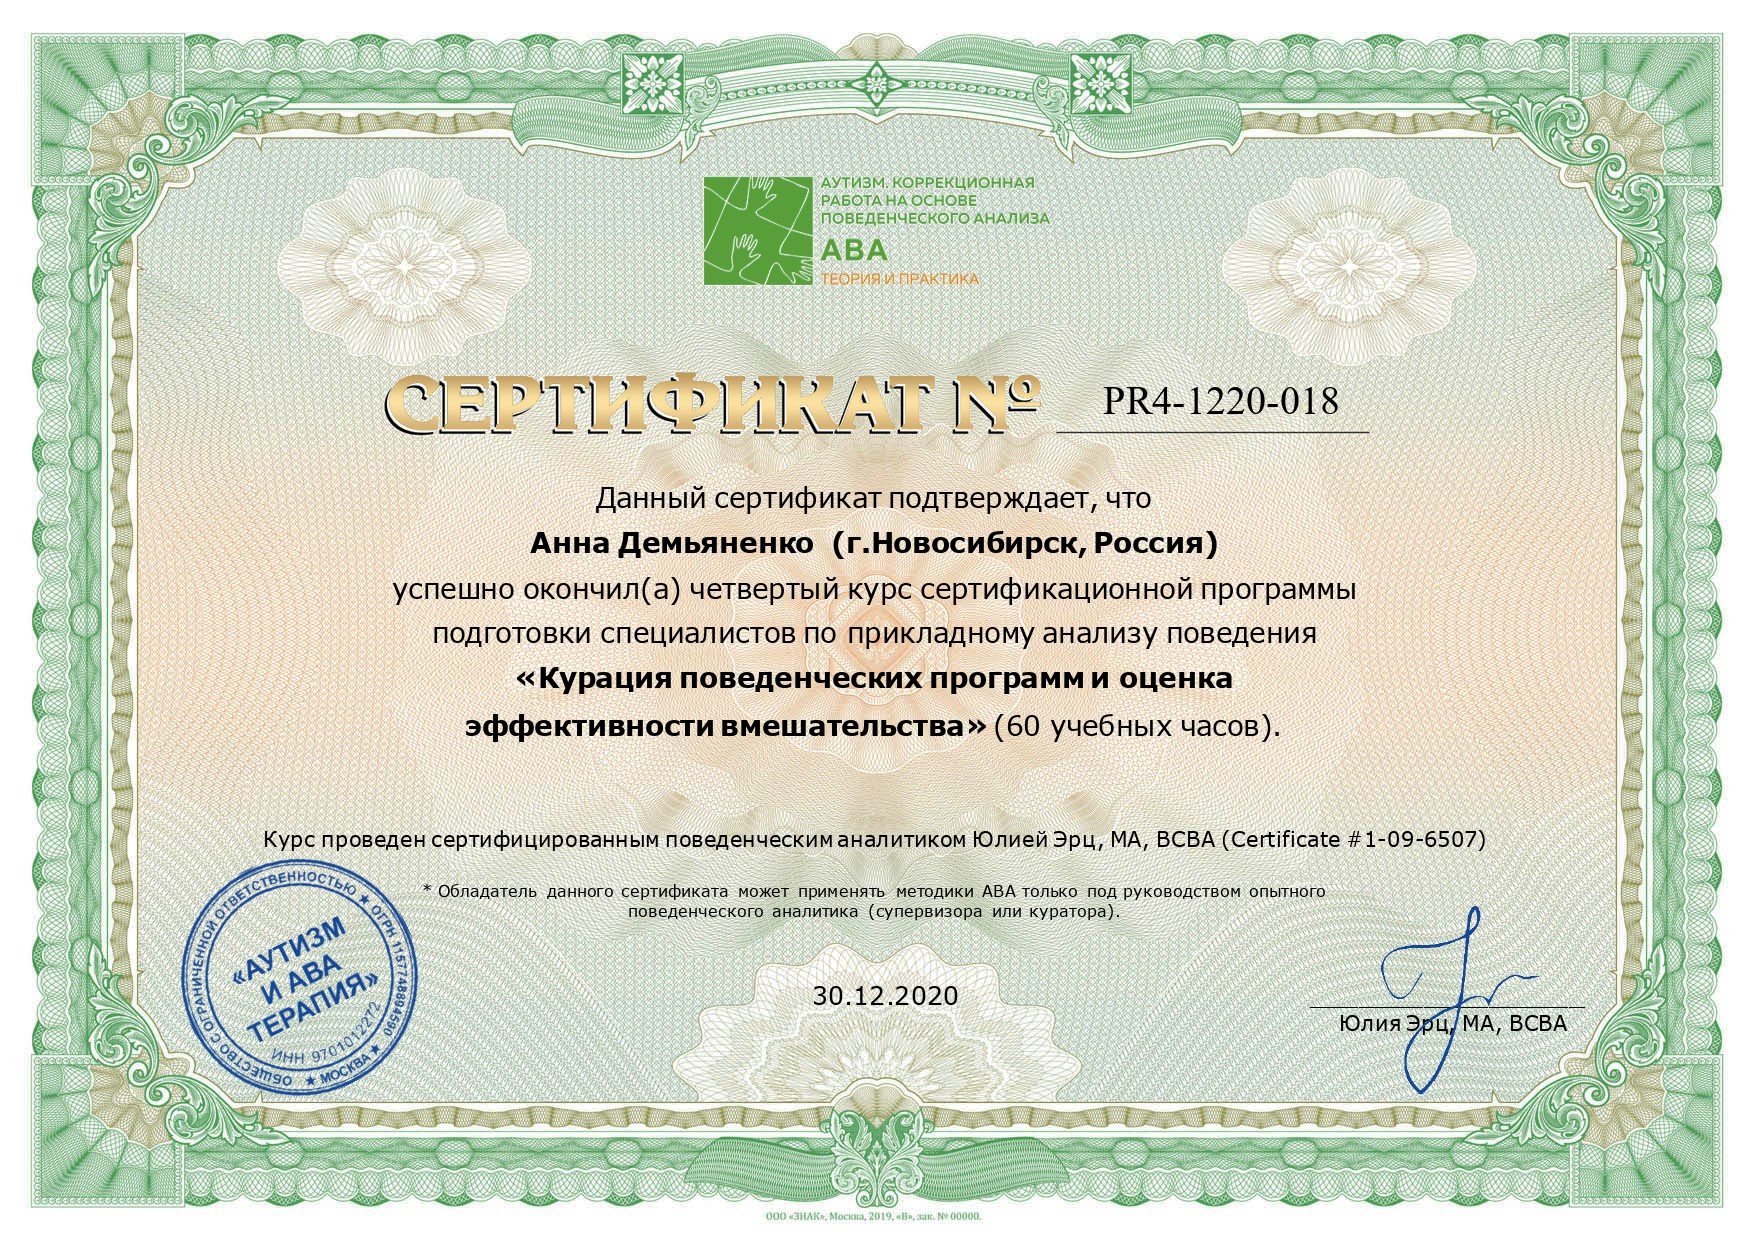 Демьяненко Анна - module4_cert_pages-to-jpg-0001